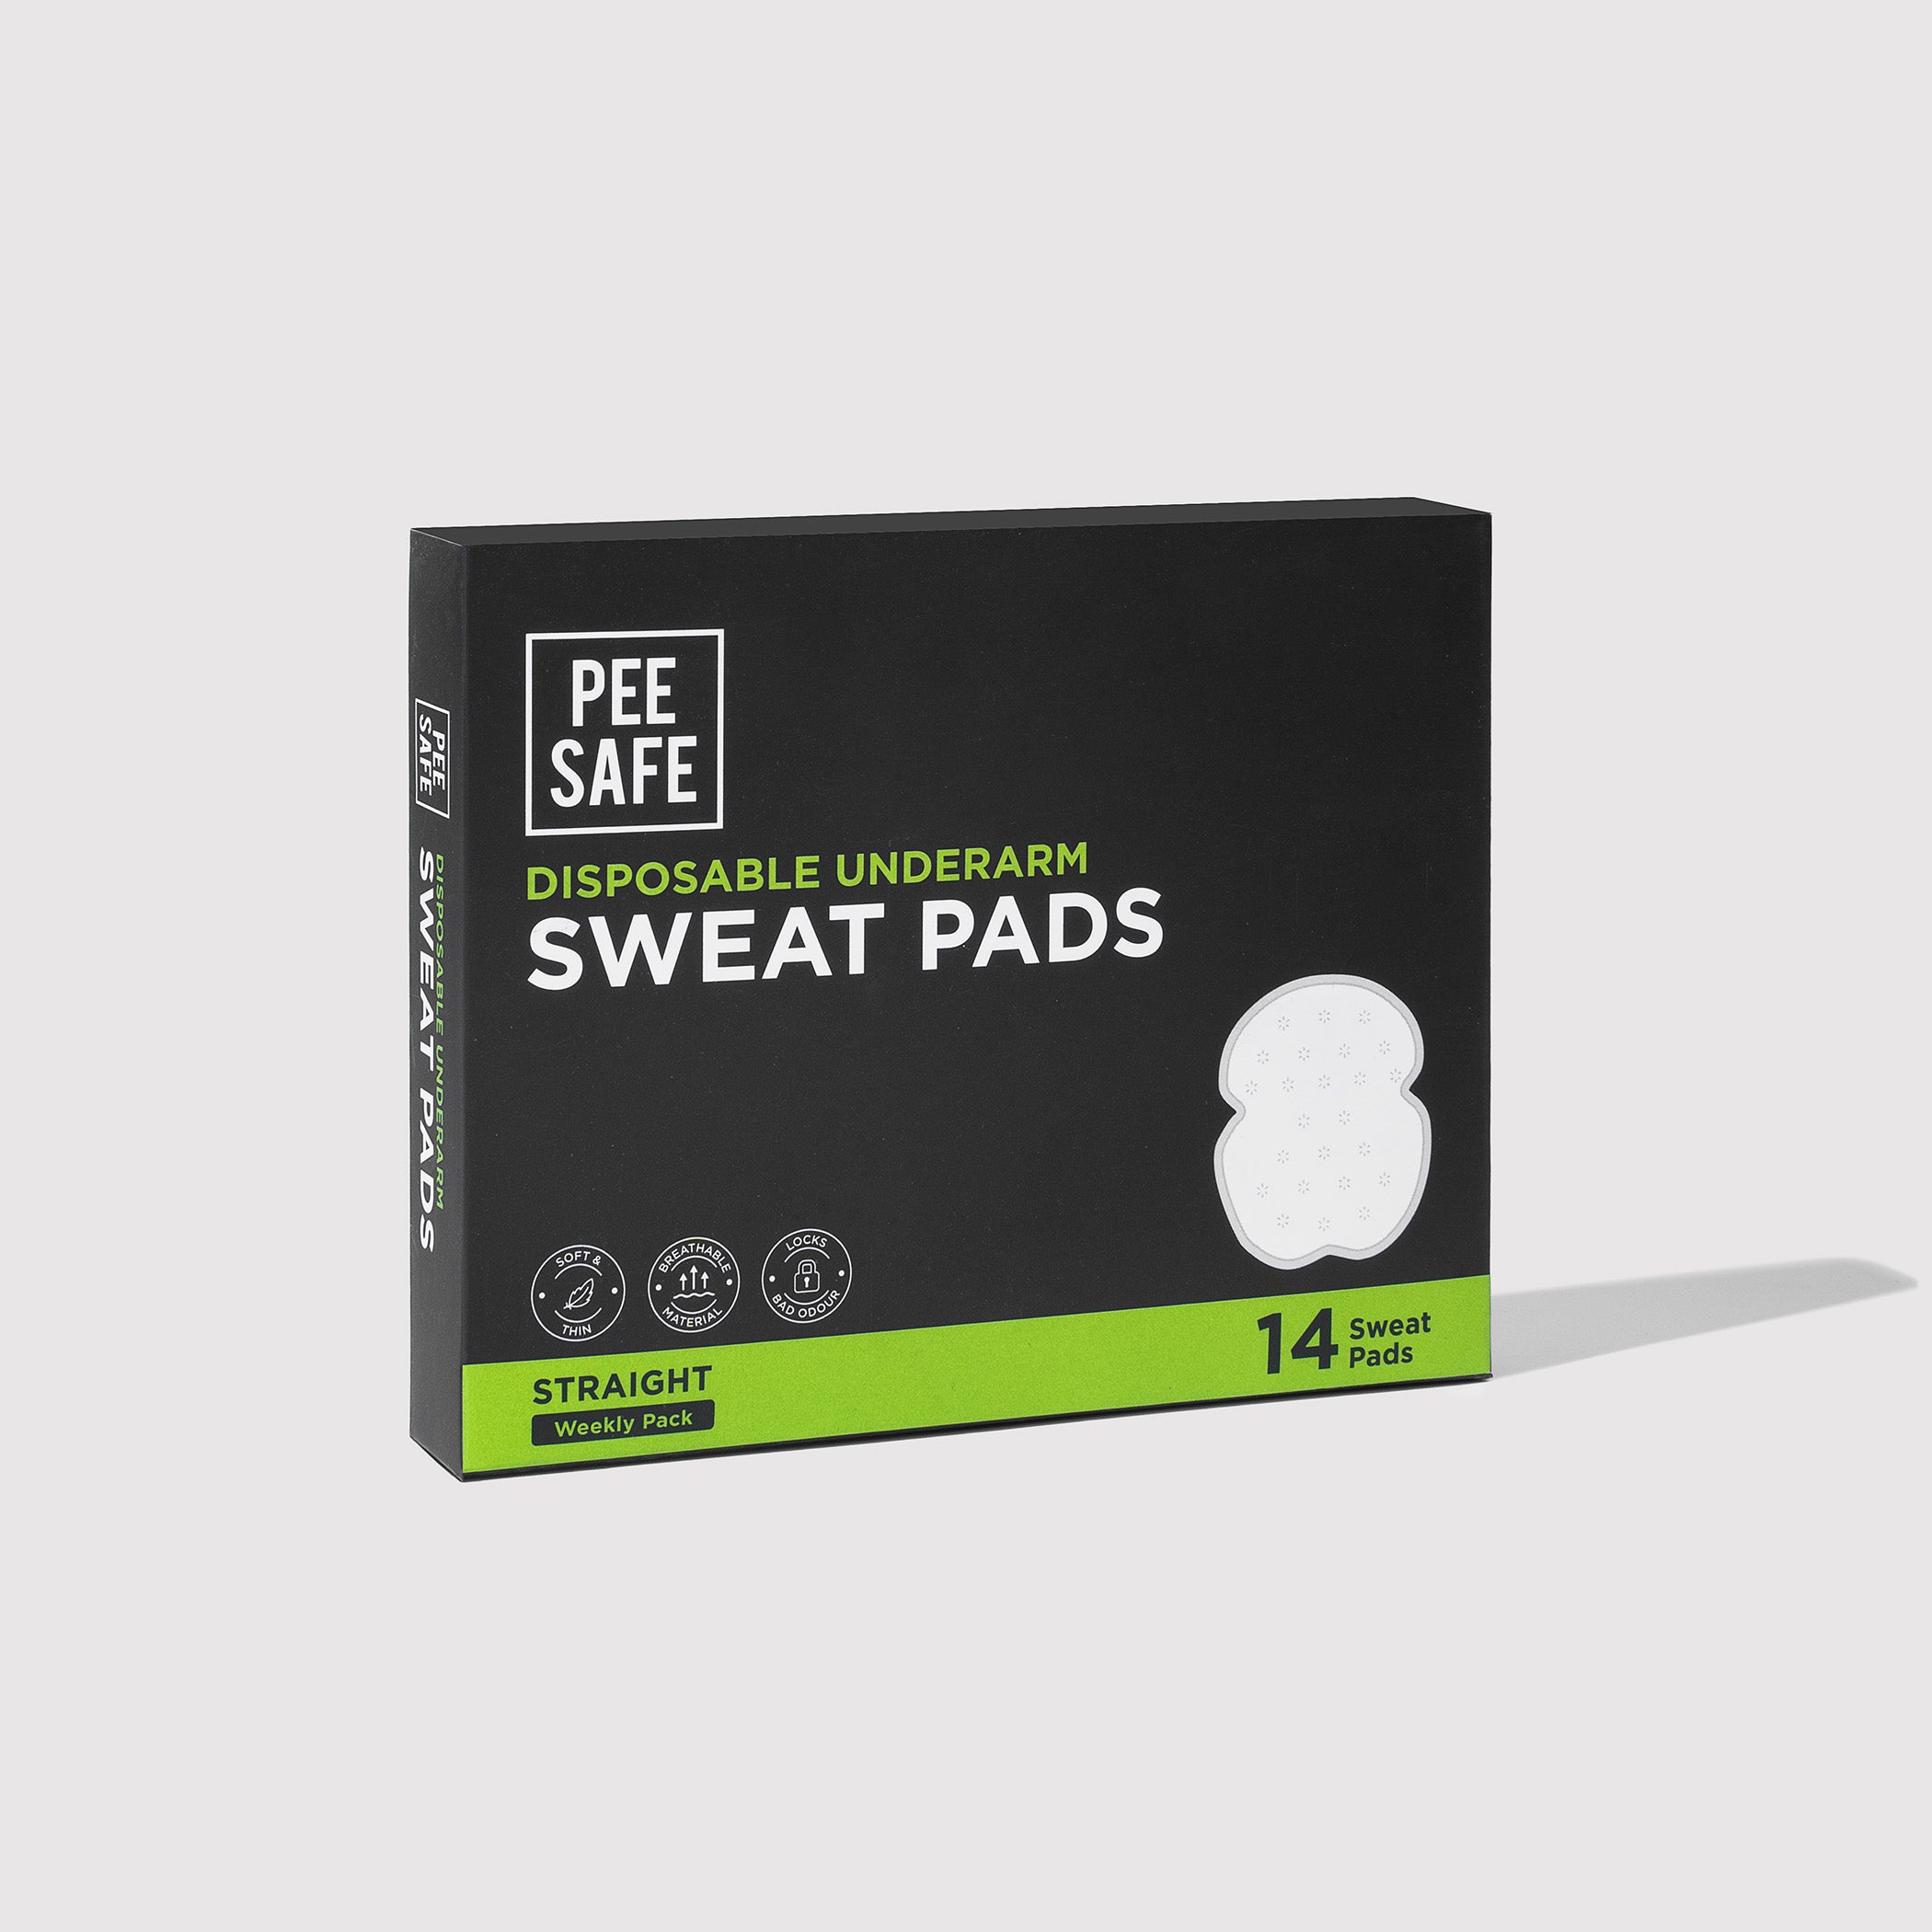 Pee Safe Disposable Underarm Sweat Pads (Straight) - 14 Pads